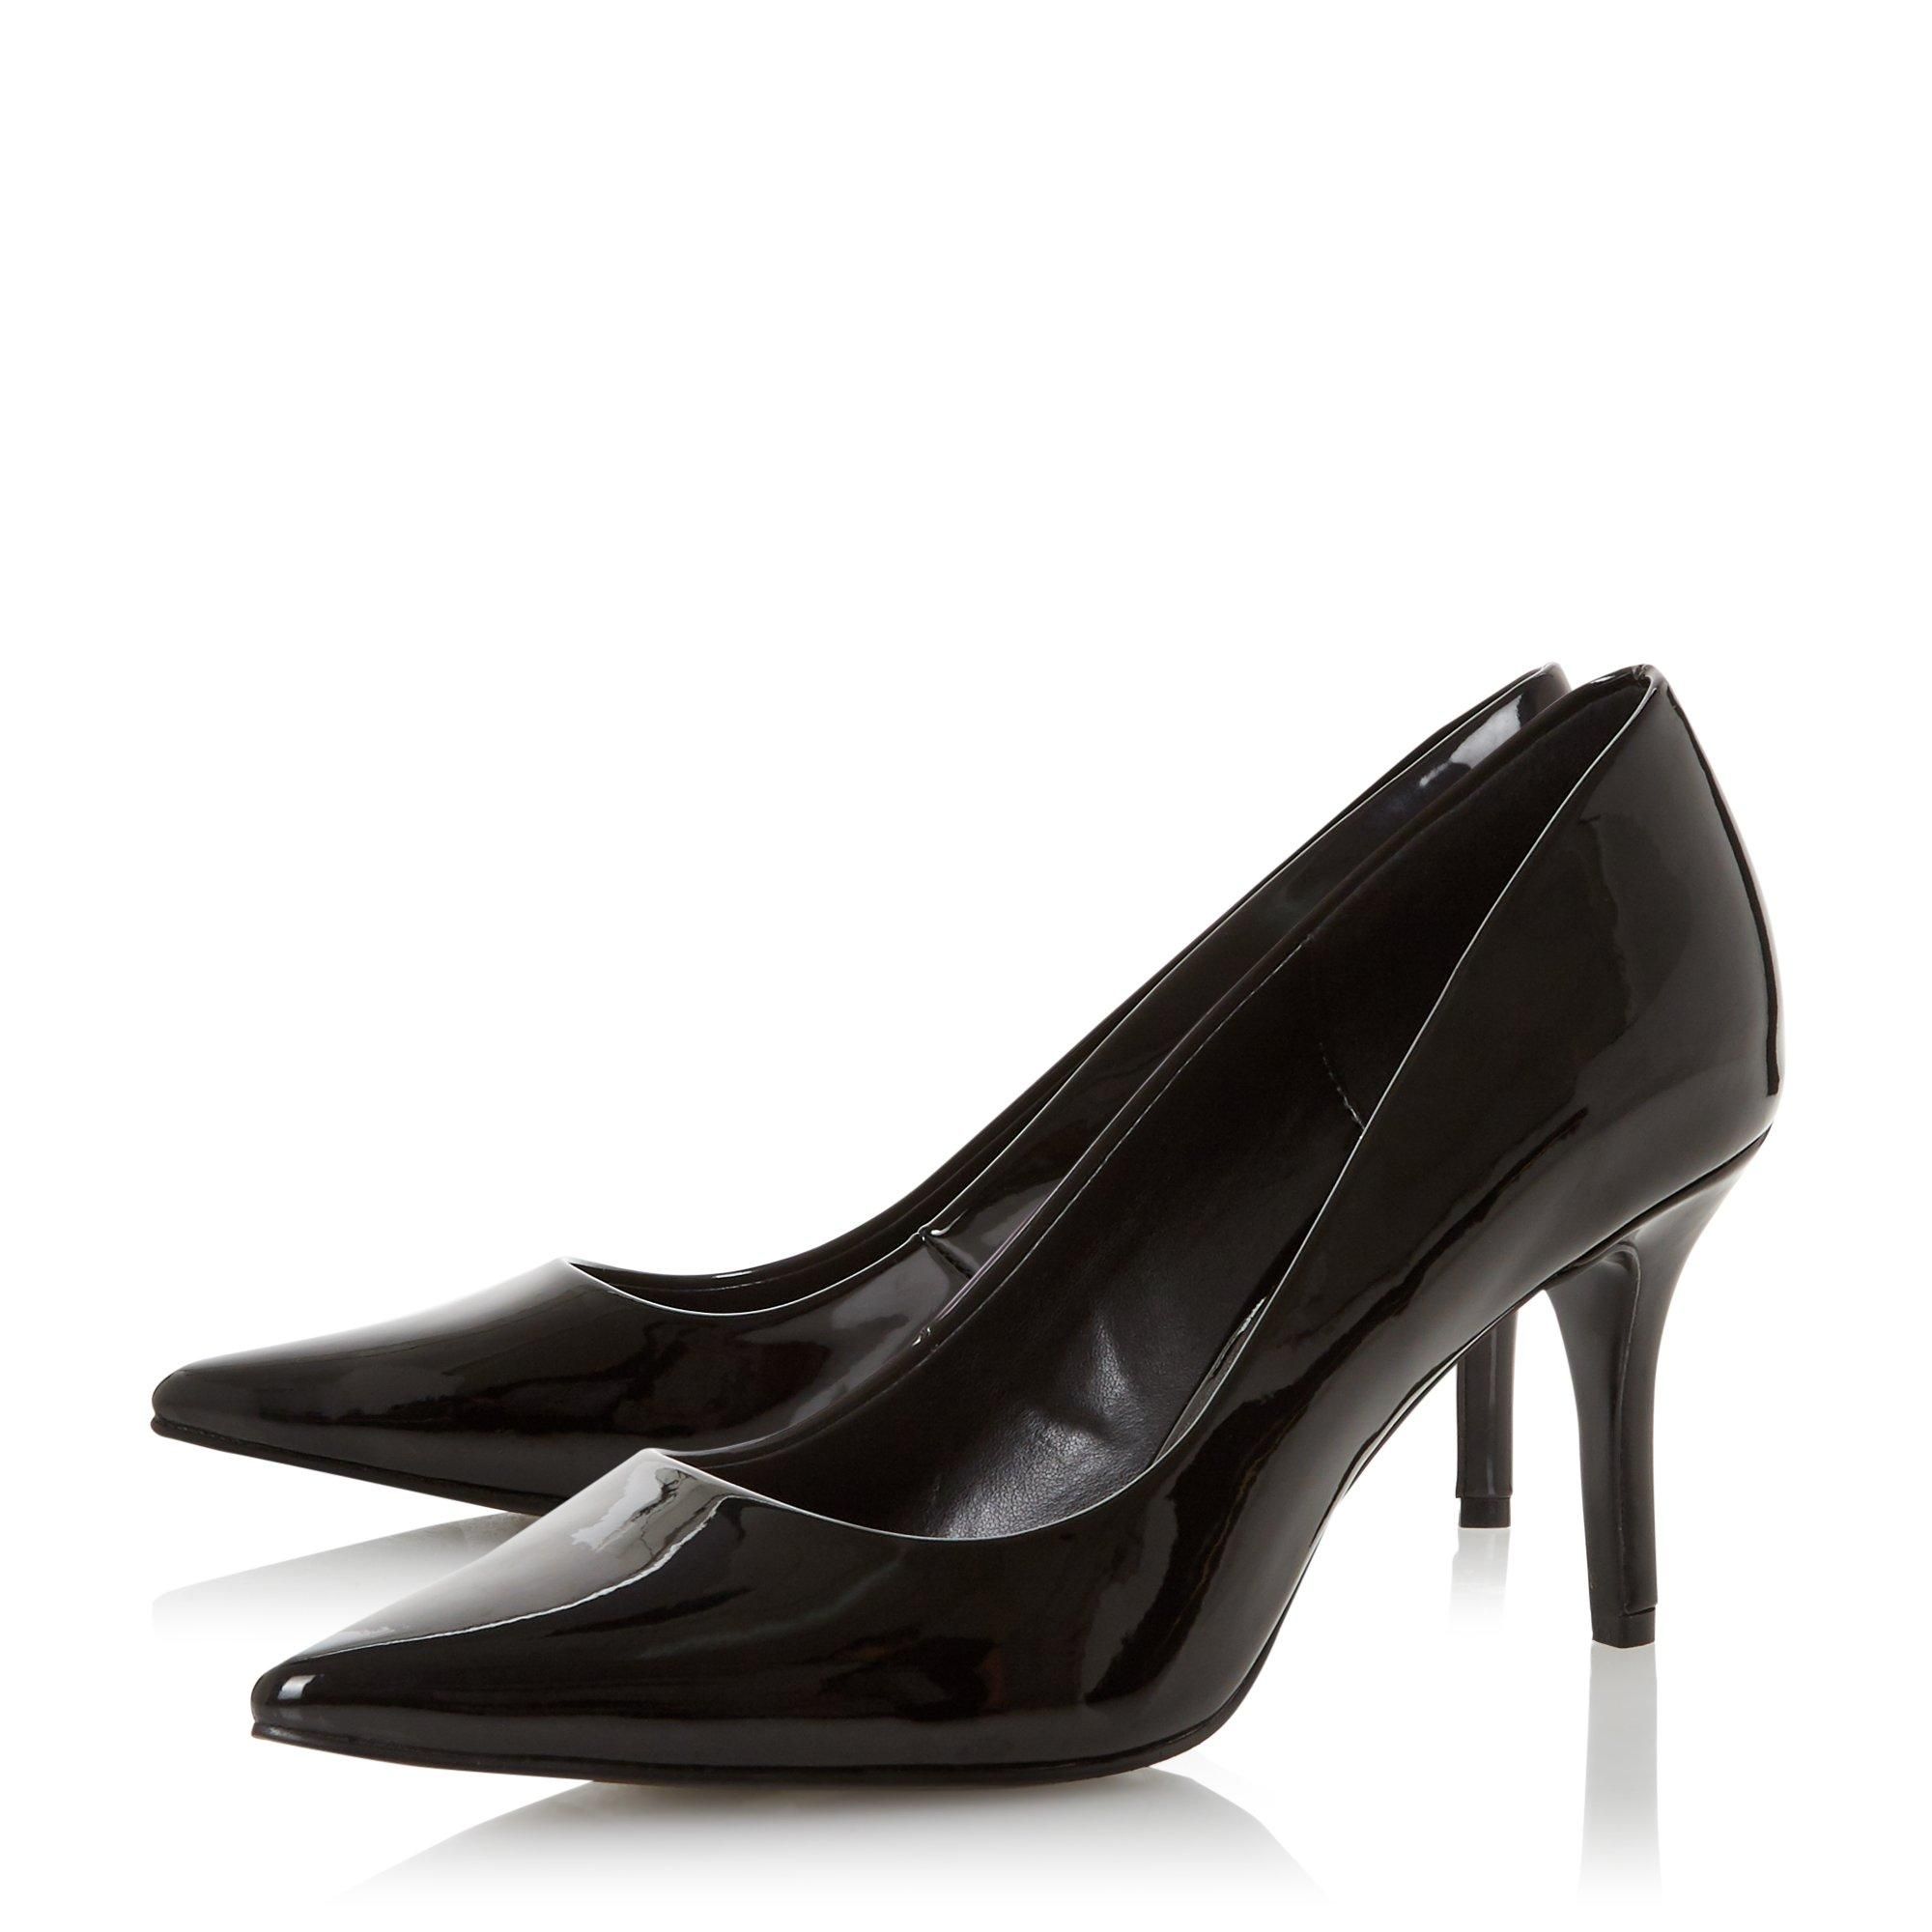 Channel bold and elegant femininity with the Allina court shoe from Dune. Its silhouette is defined by a timeless stiletto heel and a pointed toe. This classic court is the perfect day to evening style.